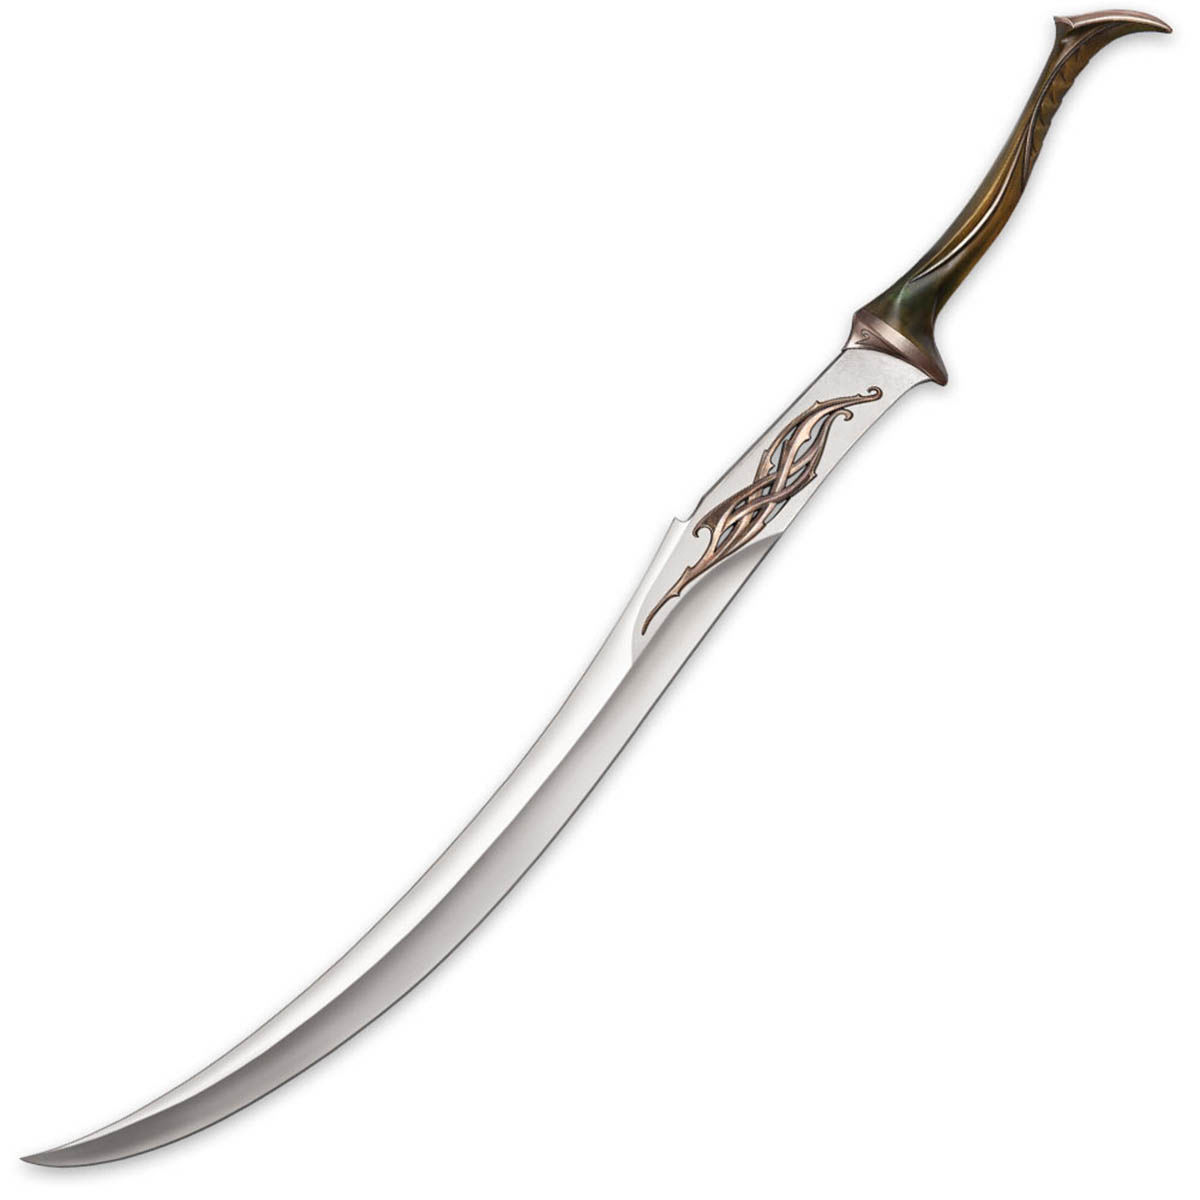 The Hobbit Officially Licensed Mirkwood Infantry Sword from Lord of the Rin...